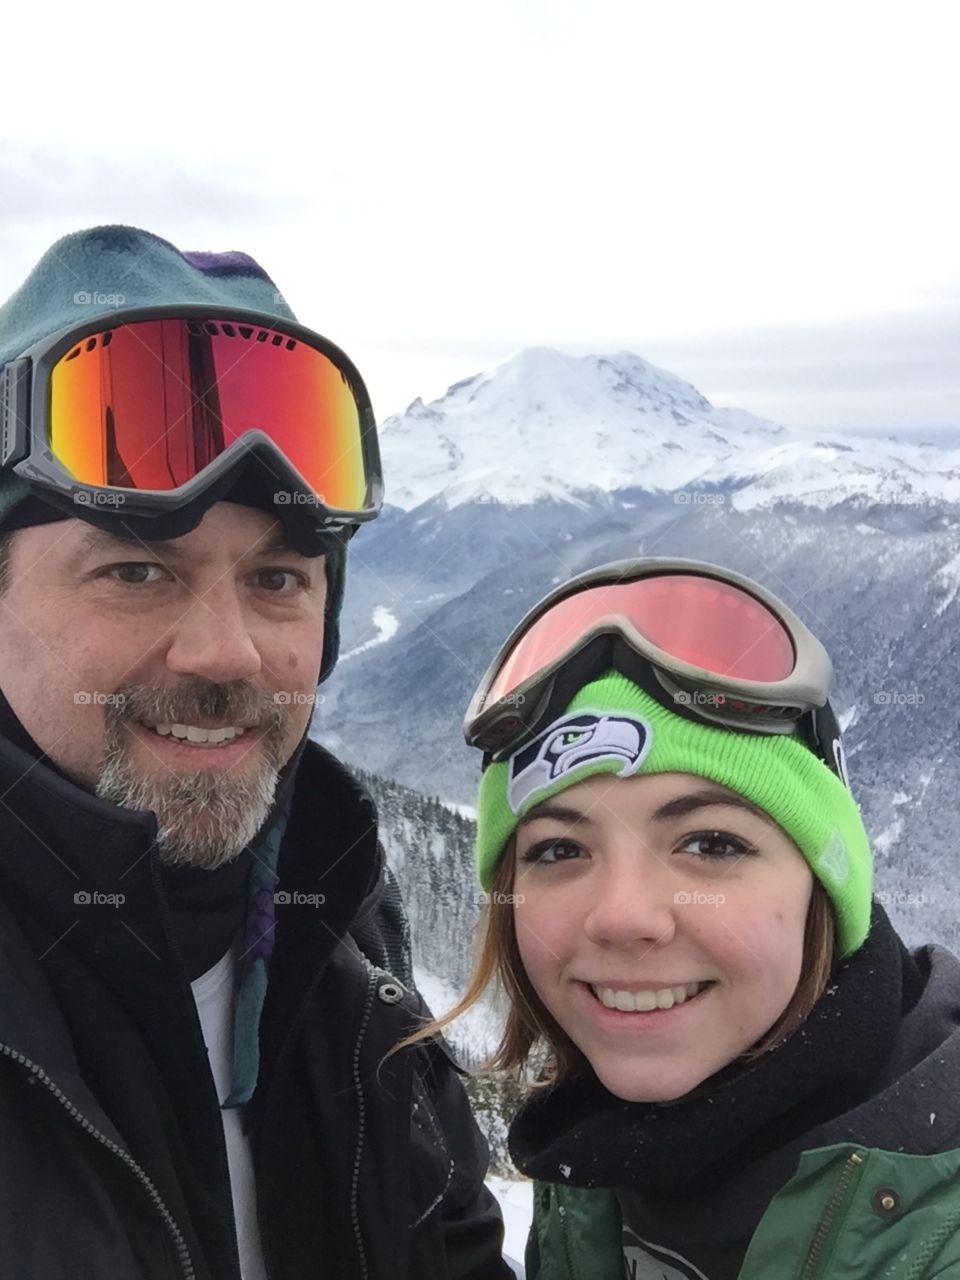 Father and daughter ski trip